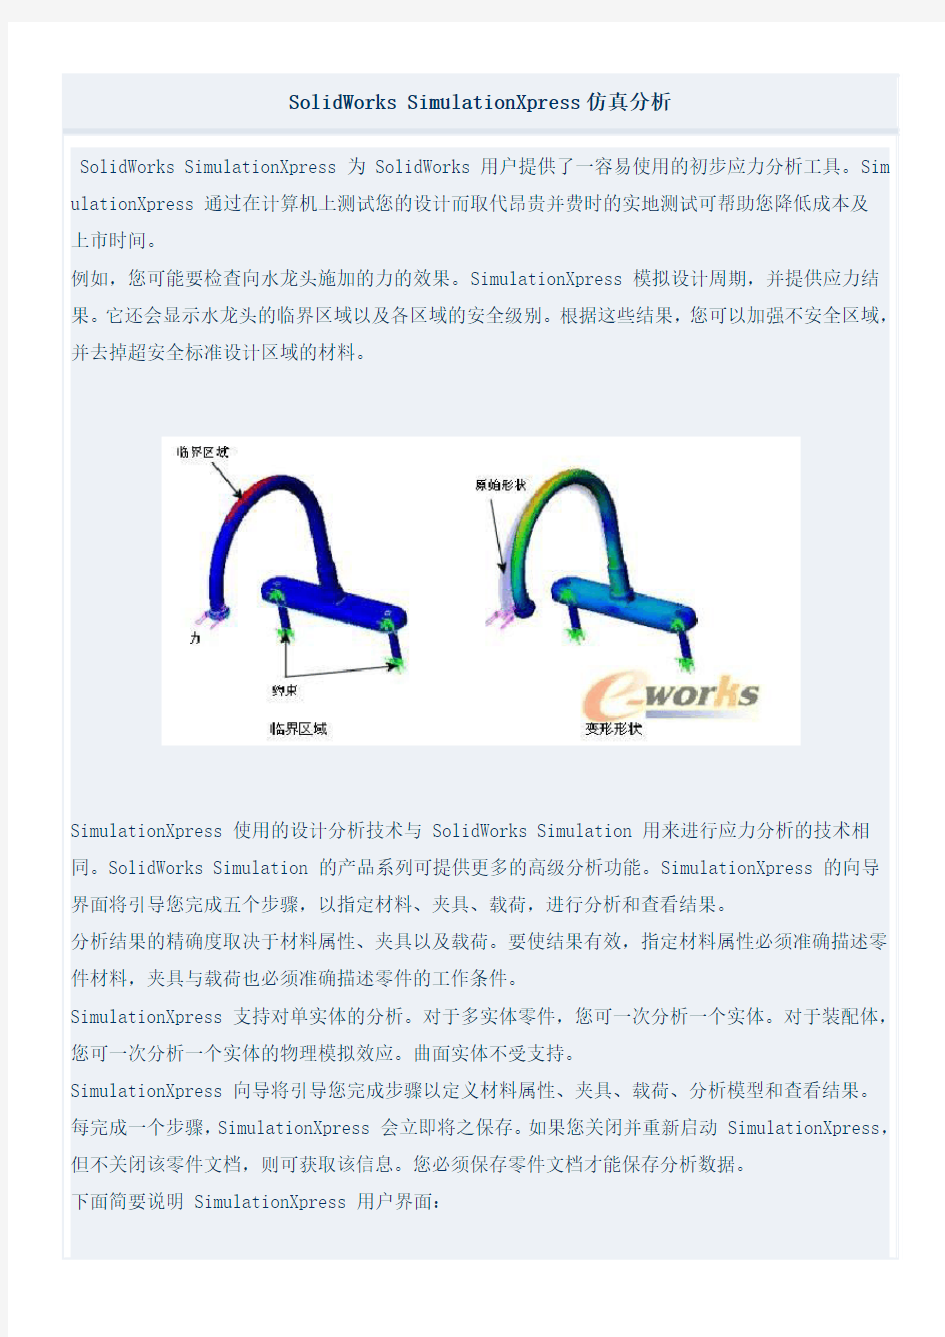 SolidWorks_SimulationXpress仿真介绍